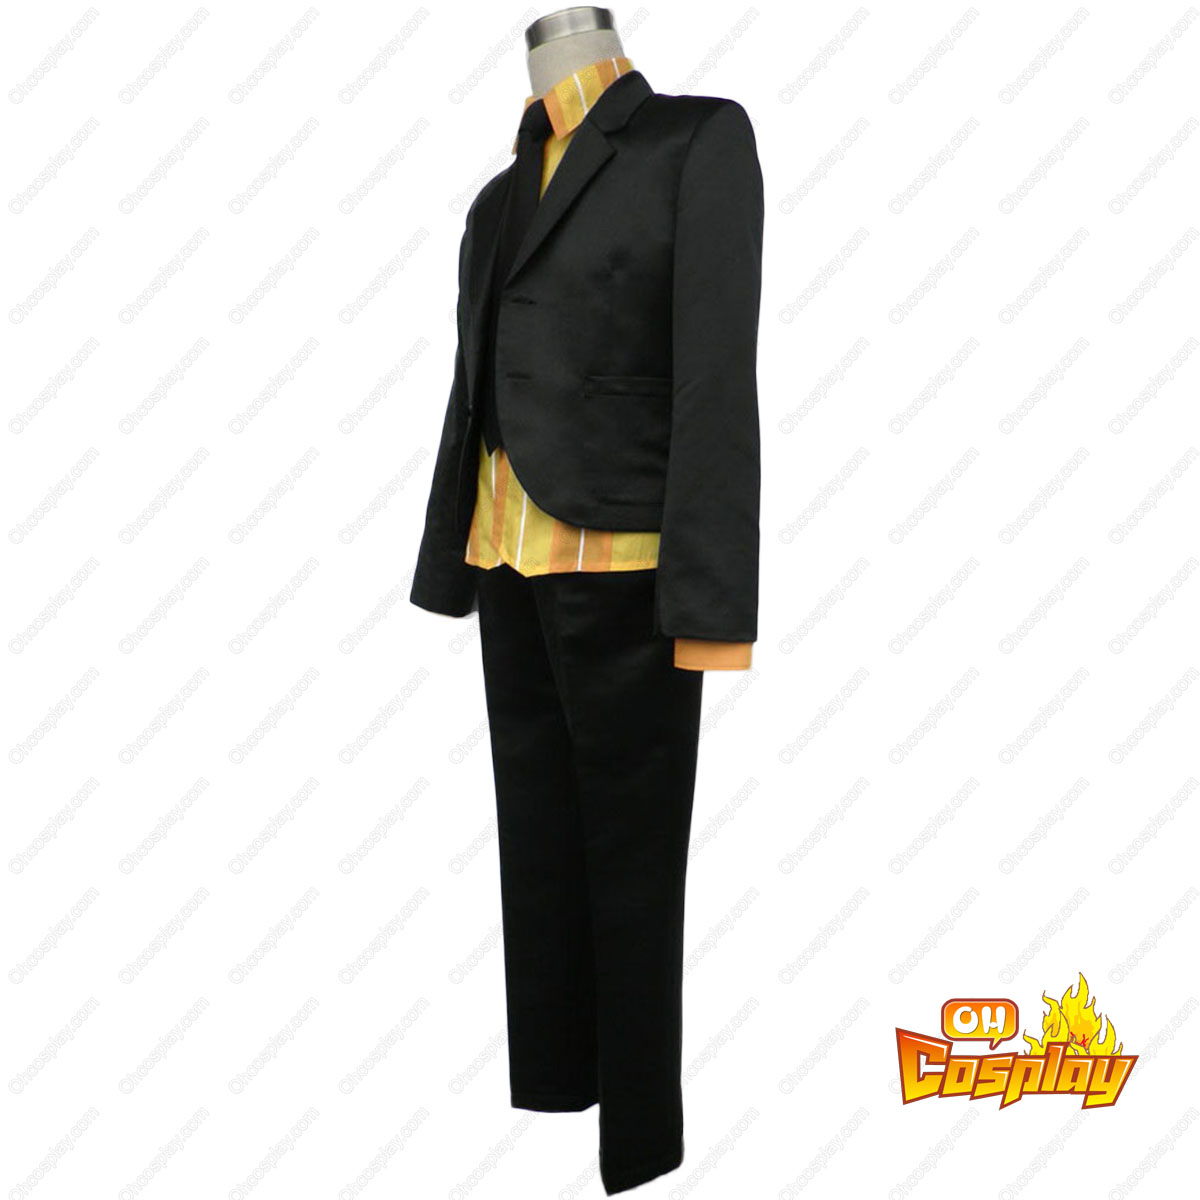 Lucky Dog1 Gian·Carlo 2ND Cosplay Costumes Deluxe Edition